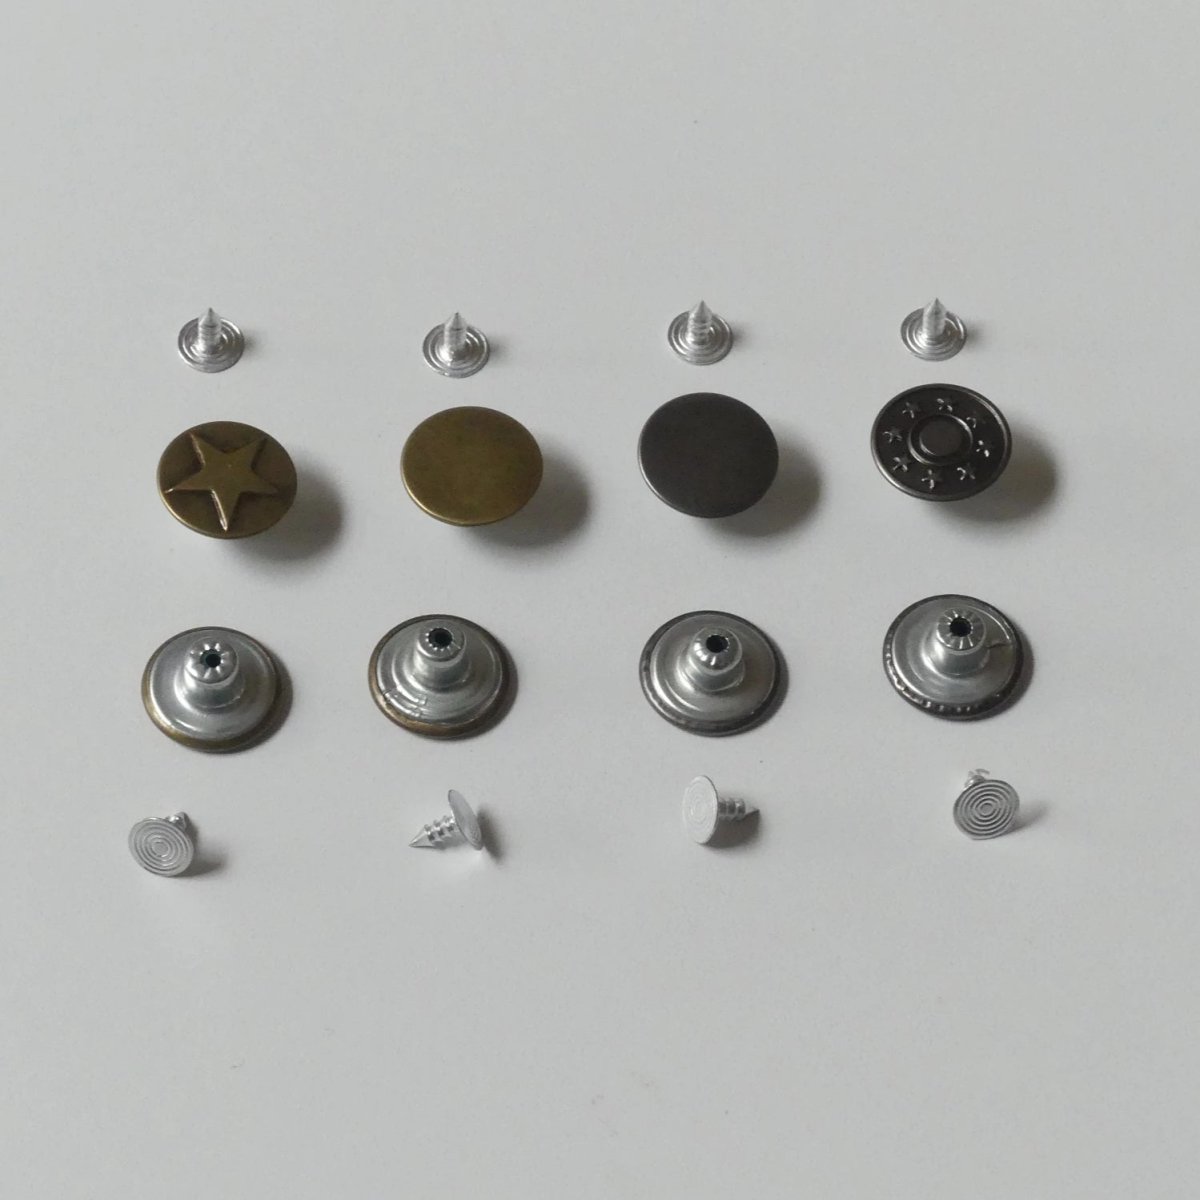 Ruthe 100 Sets Metal Snap Buttons, Sew-On Snaps Fasteners Press Studs  Buttons for Sewing Clothing, Jeans, Jackets, 8 mm and 10 mm